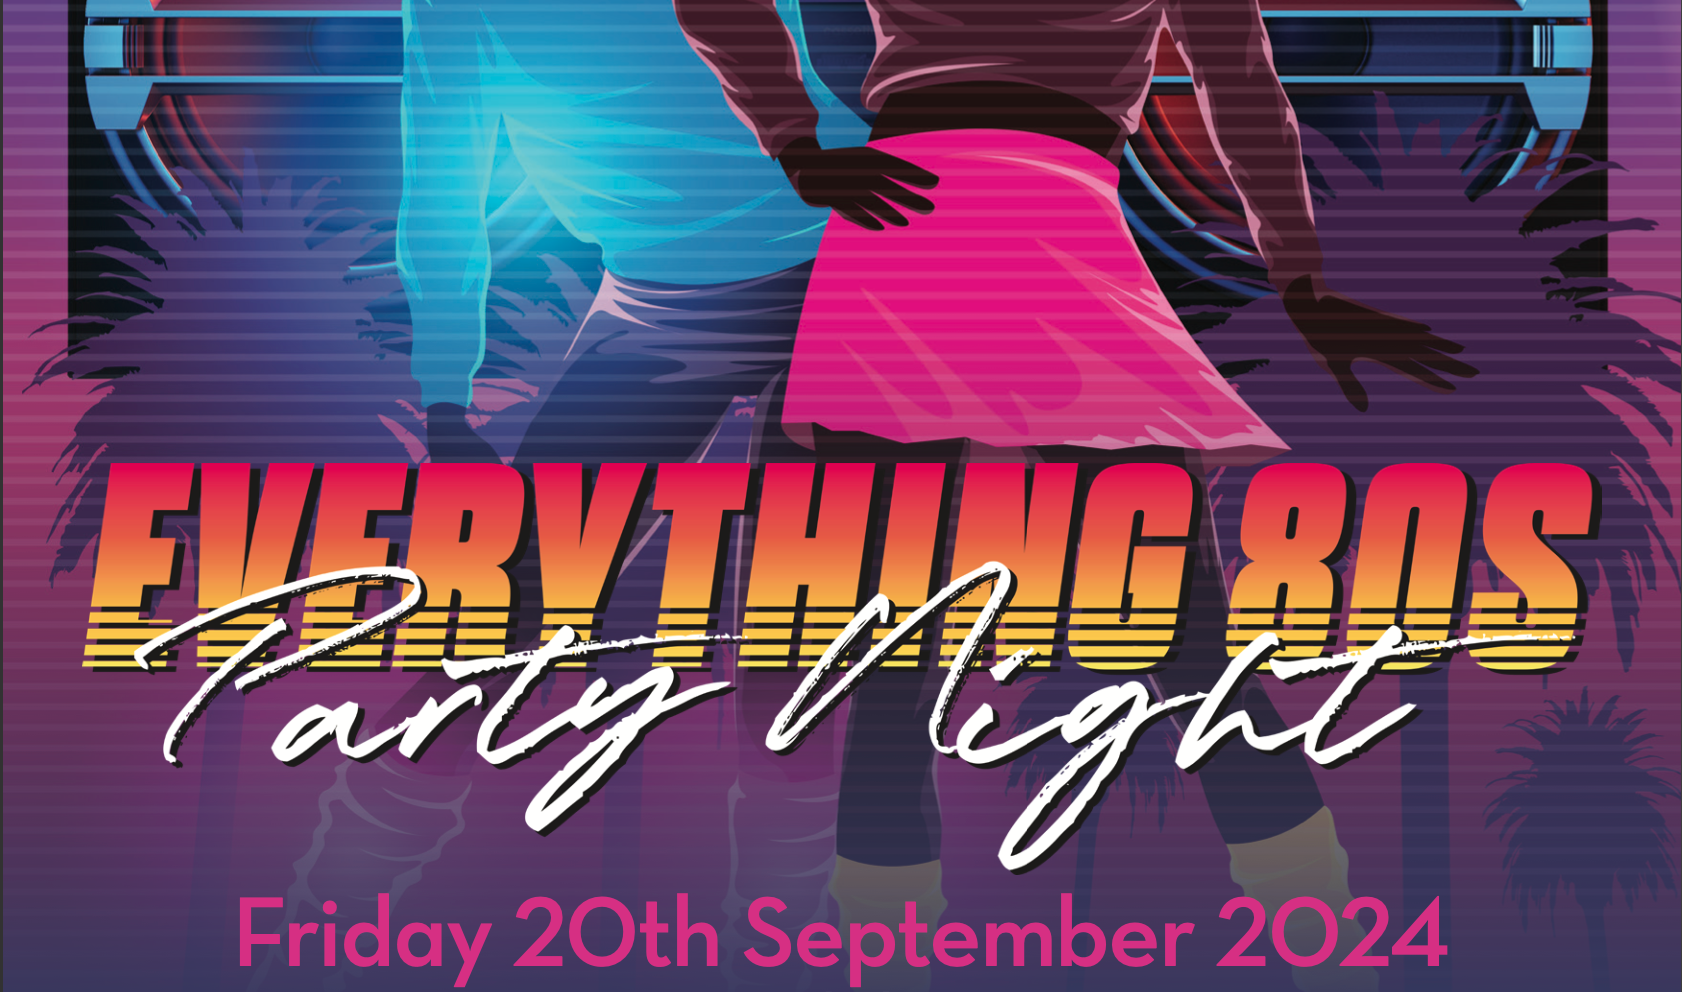 Everything 80s Party Night